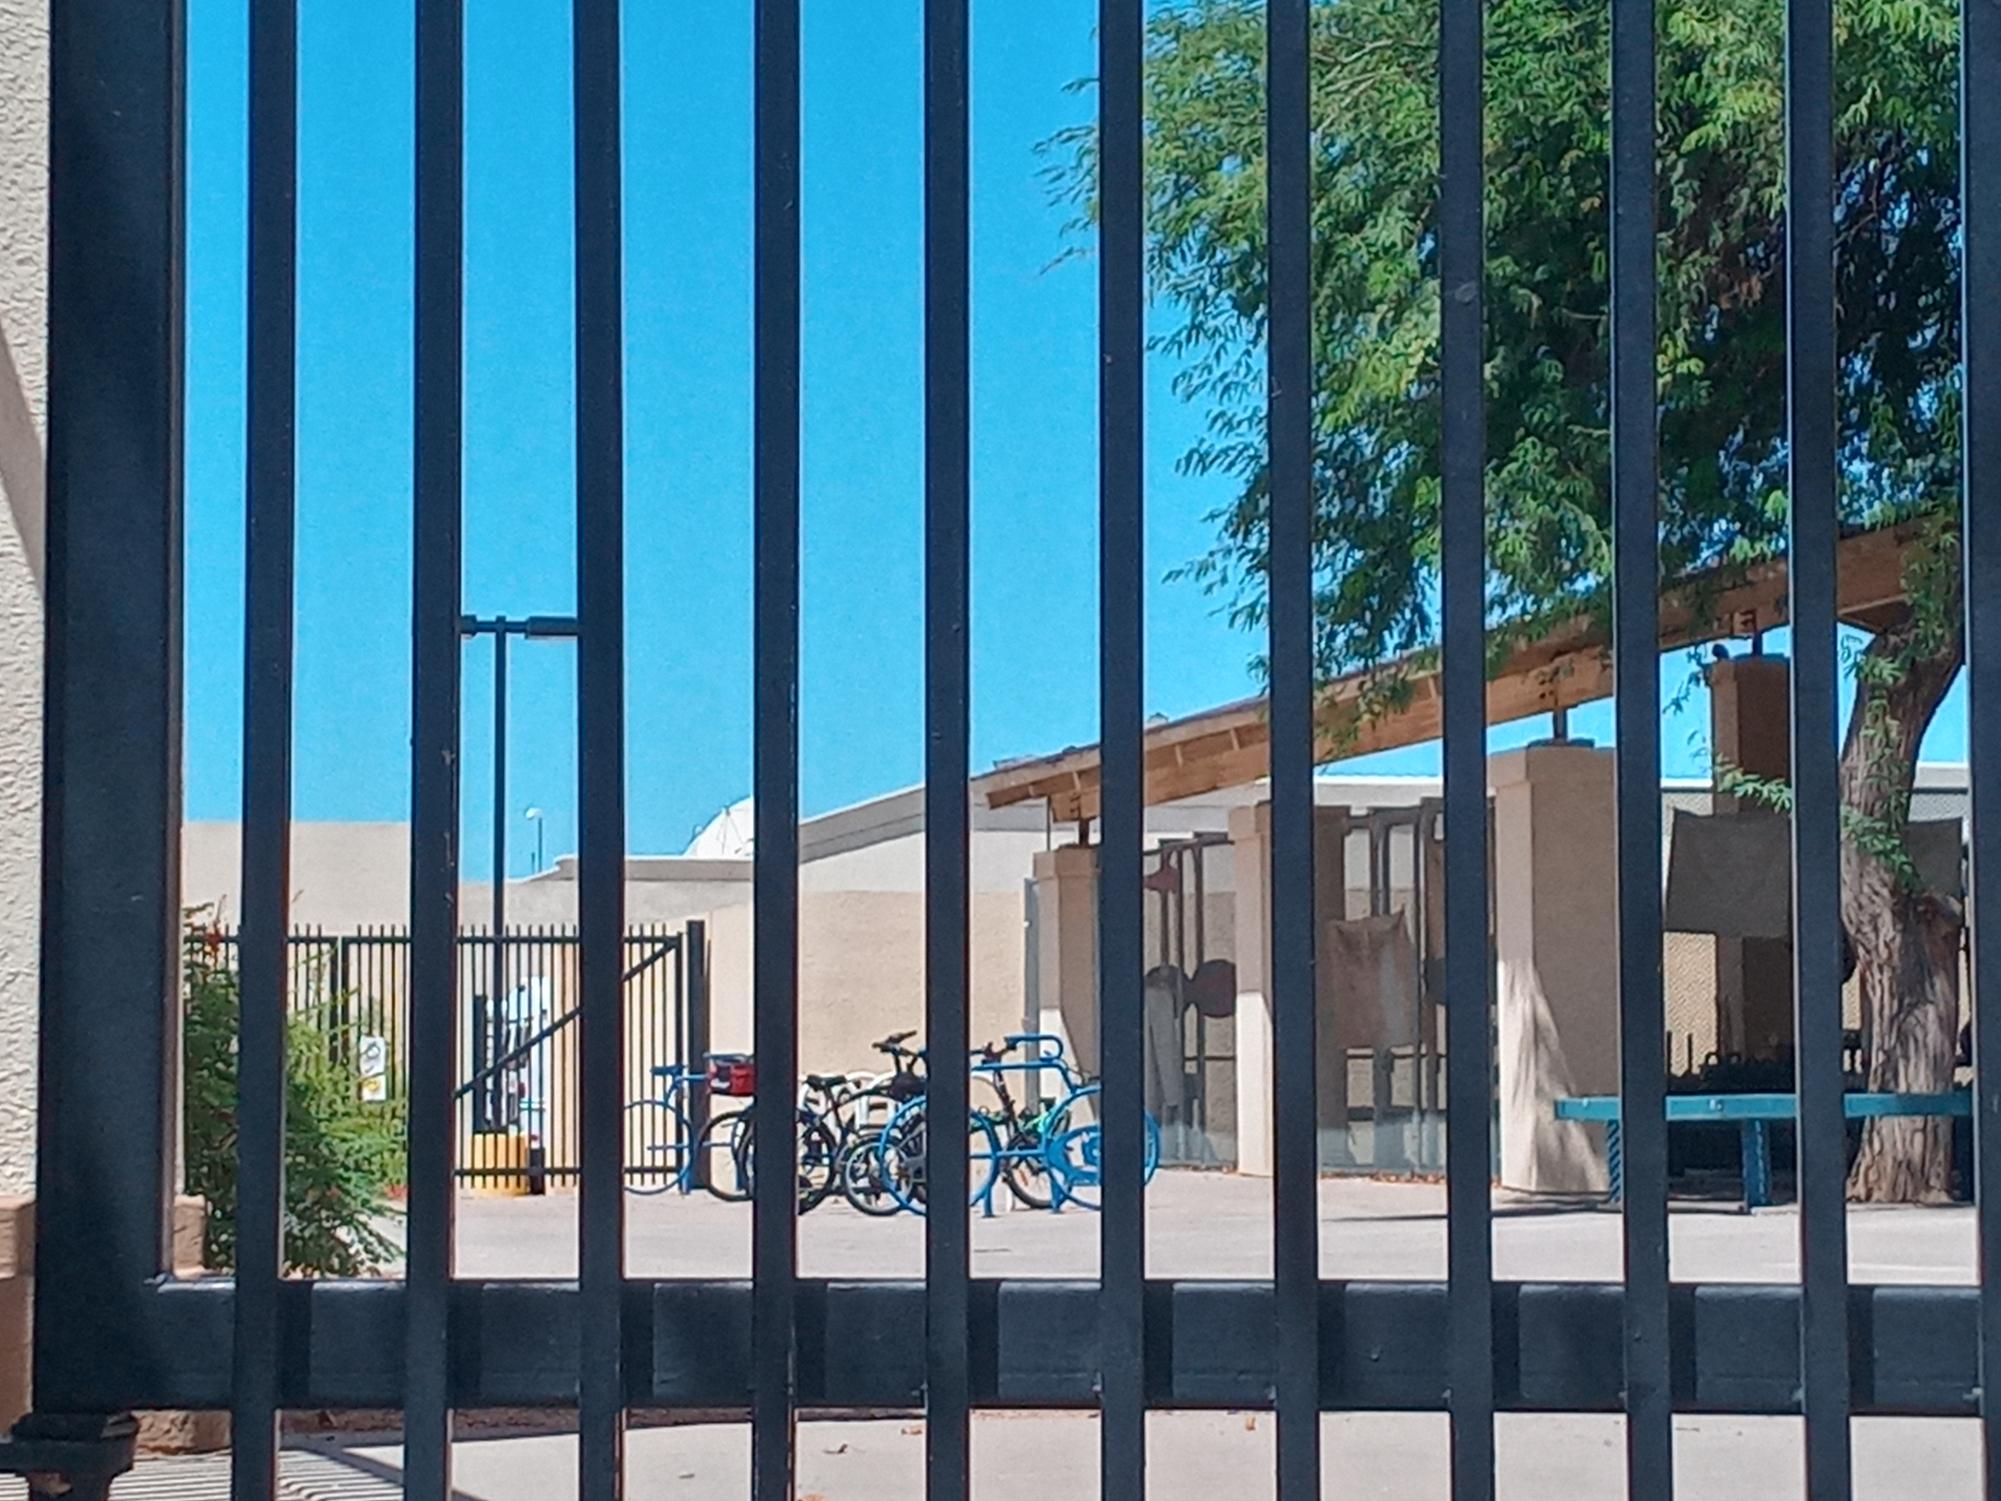 Closed Campus Gates Create Questions for Students, Staff